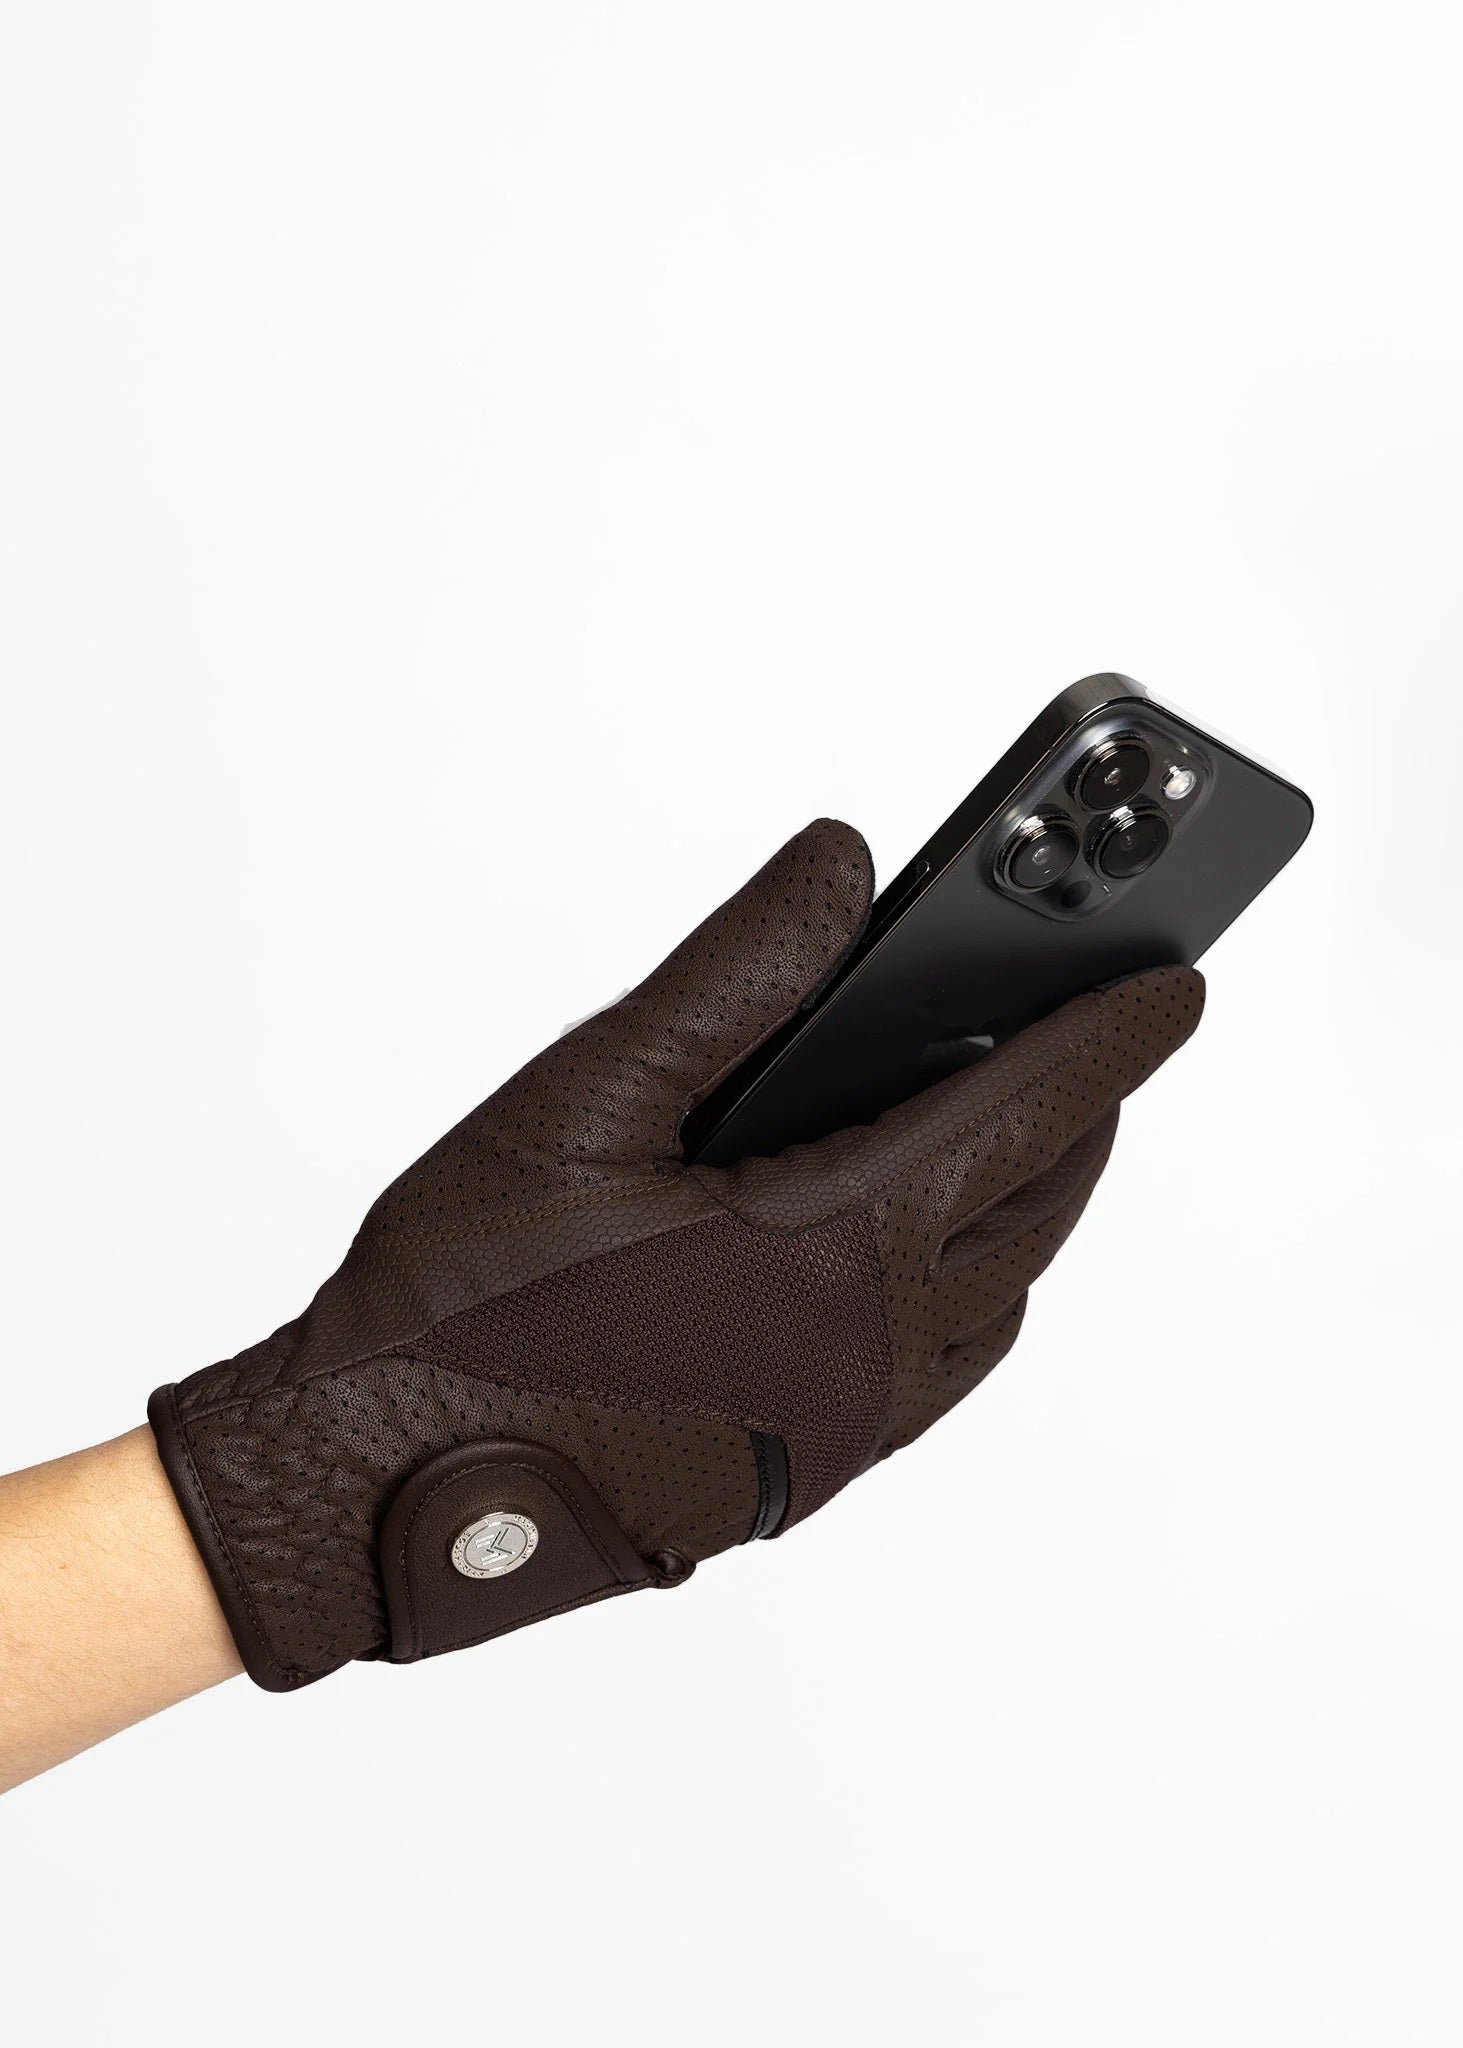 Max Riding Gloves - Chocolate